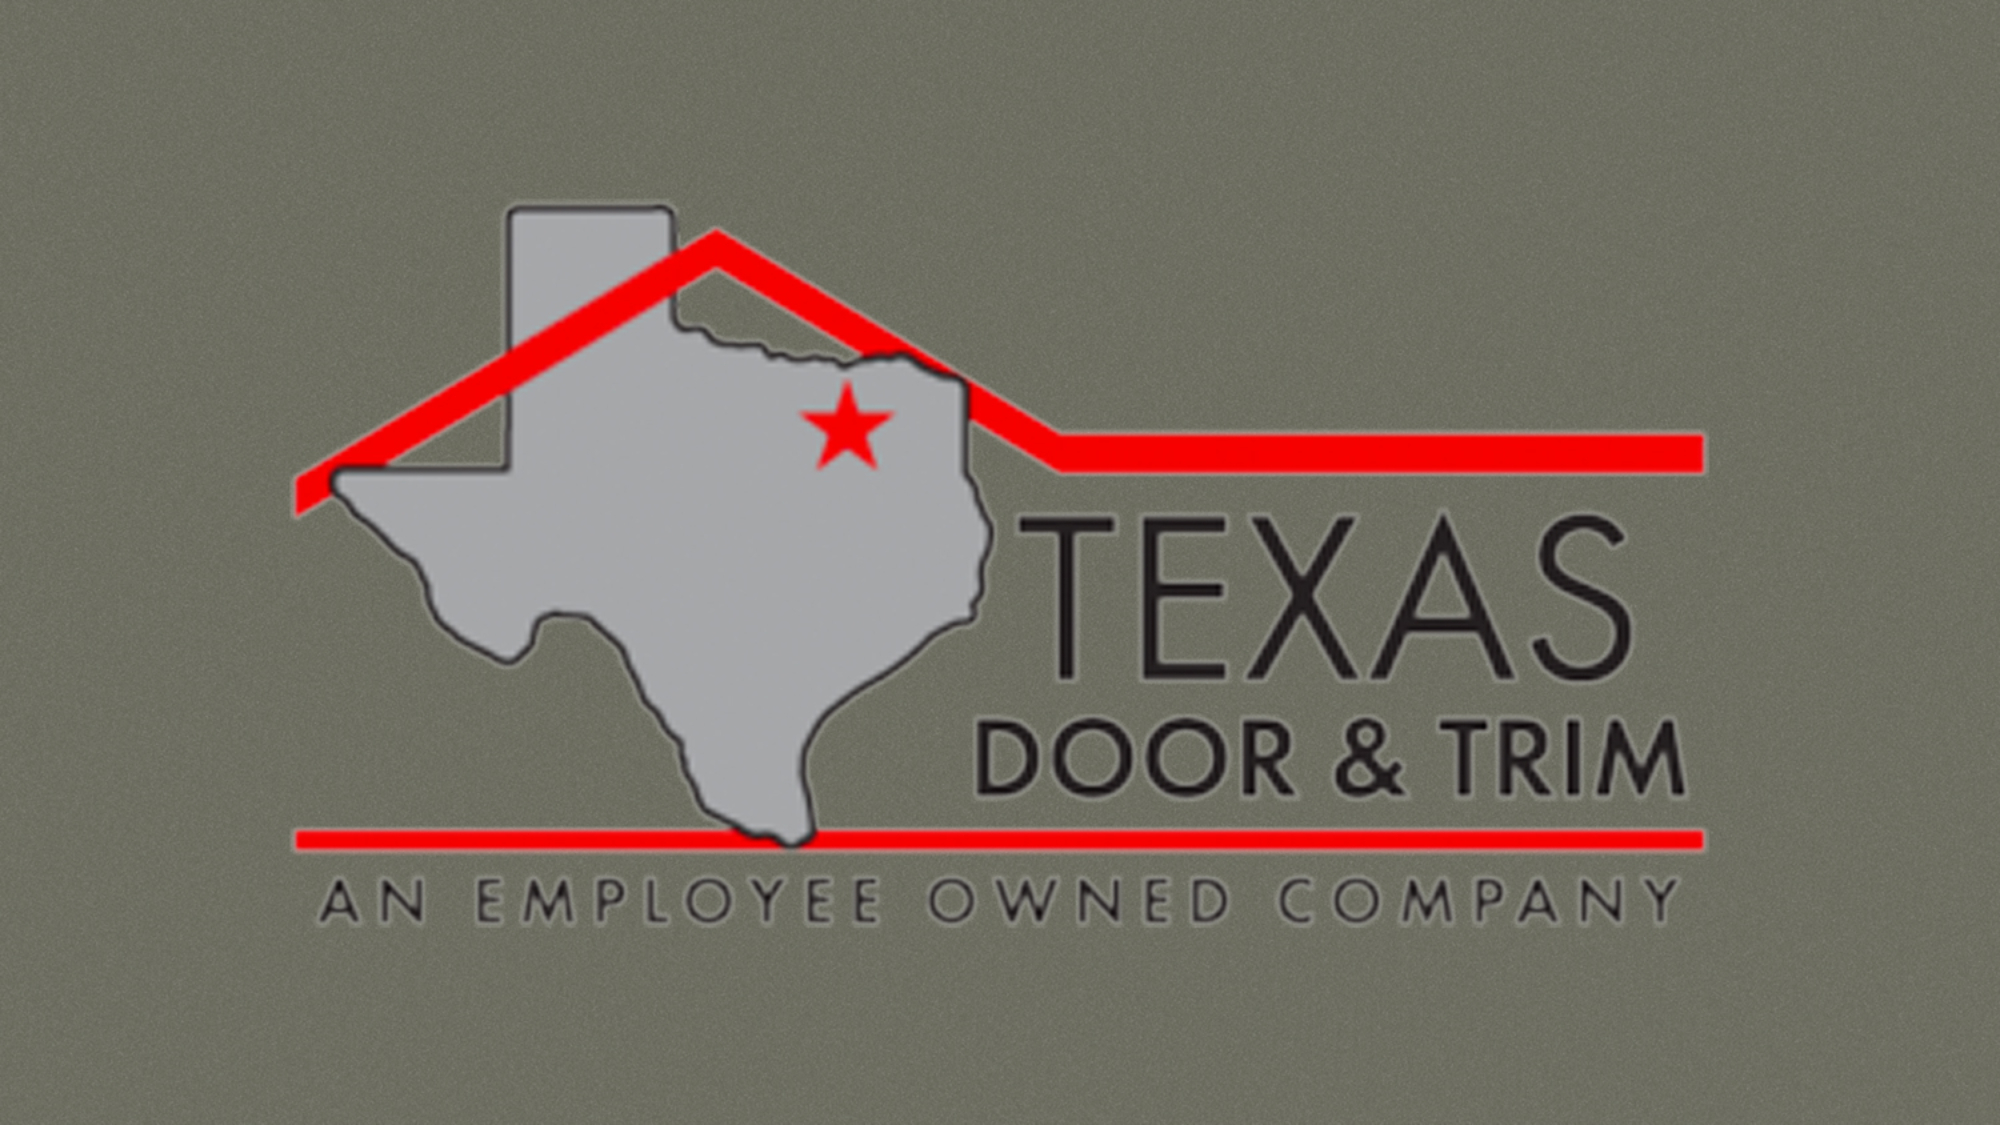 Read our comprehensive review of Texas Door and Trim, a trusted provider of high-quality doors and trim in Texas. Discover their commitment to craftsmanship, customization options, and exceptional customer service. Partner with Gott Marketing for all your marketing needs in the construction industry.